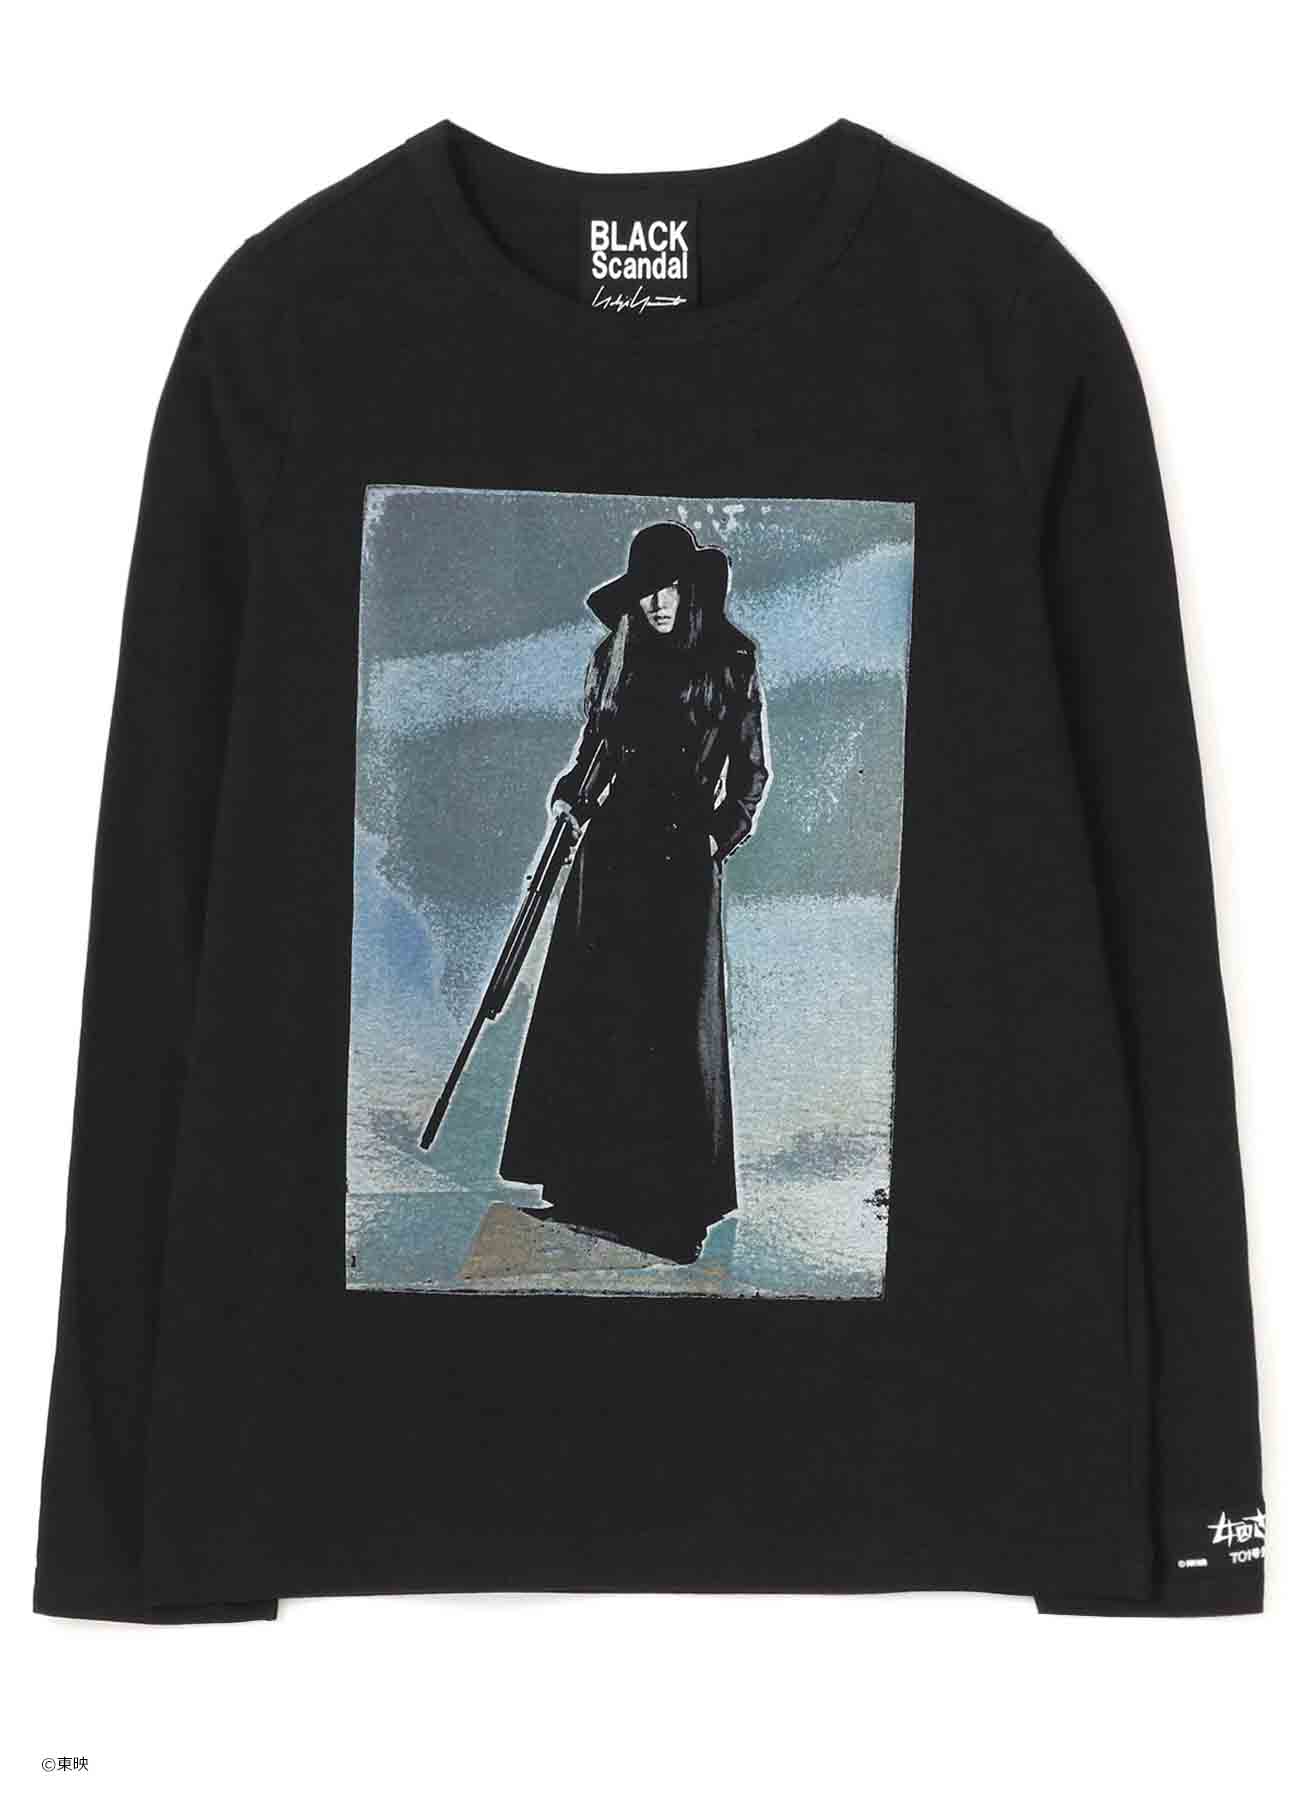 【5/24 10:00(JST) Release】FEMALE CONVICT: 701 SCORPION GRUDGE SONG LONG SLEEVES CUT SEWN